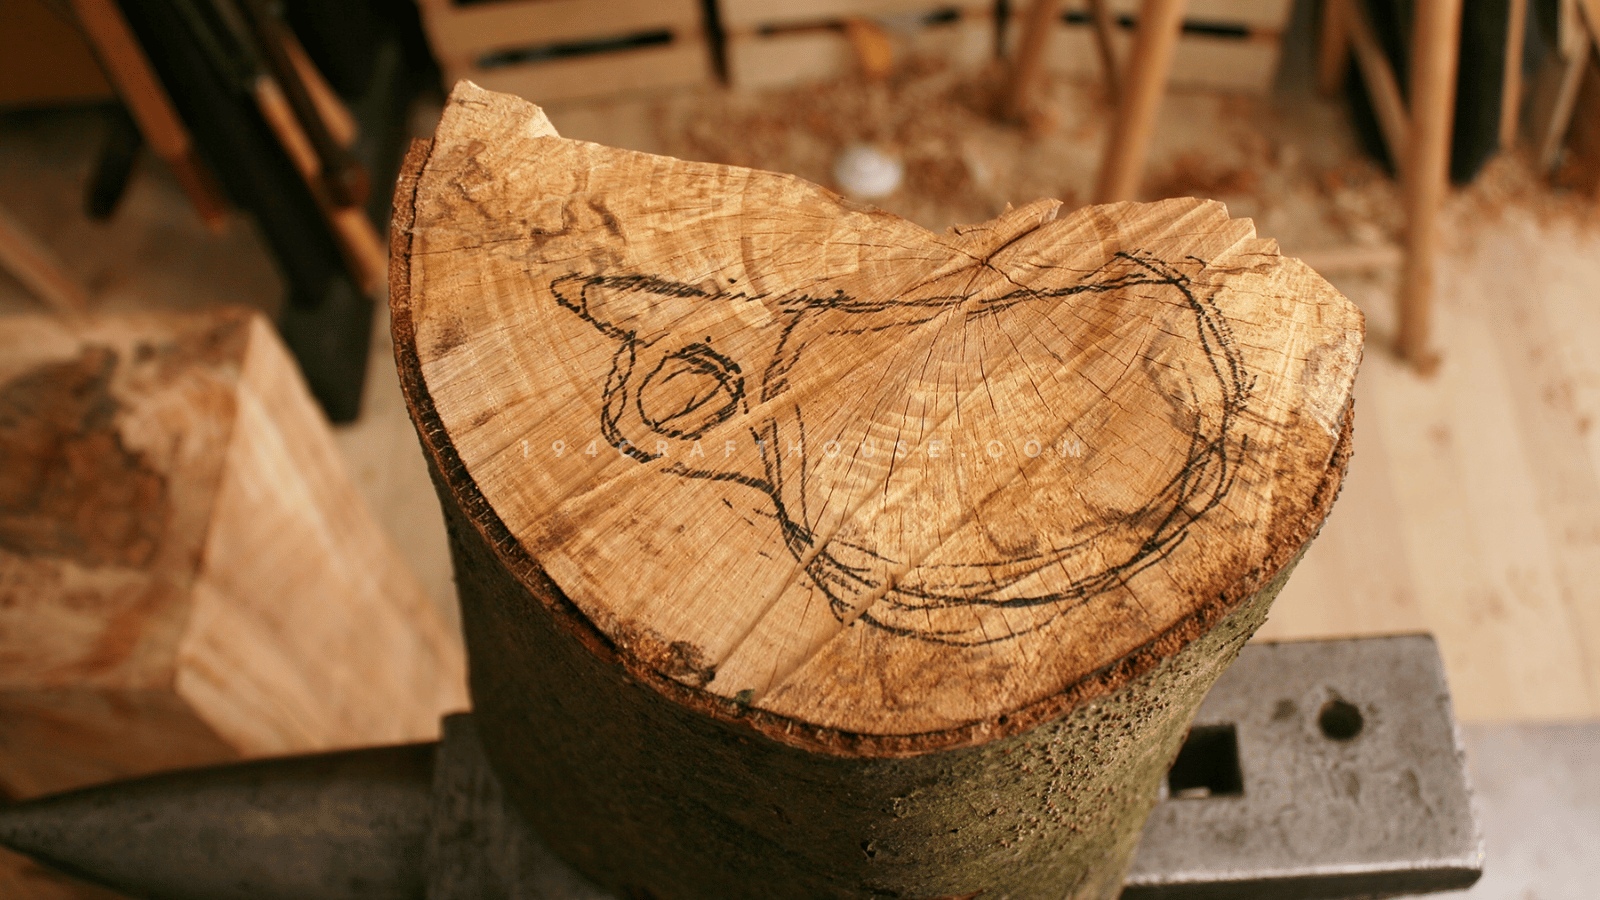 How to make a Kuksa cup step by step - Step 1: Prepare the Wood